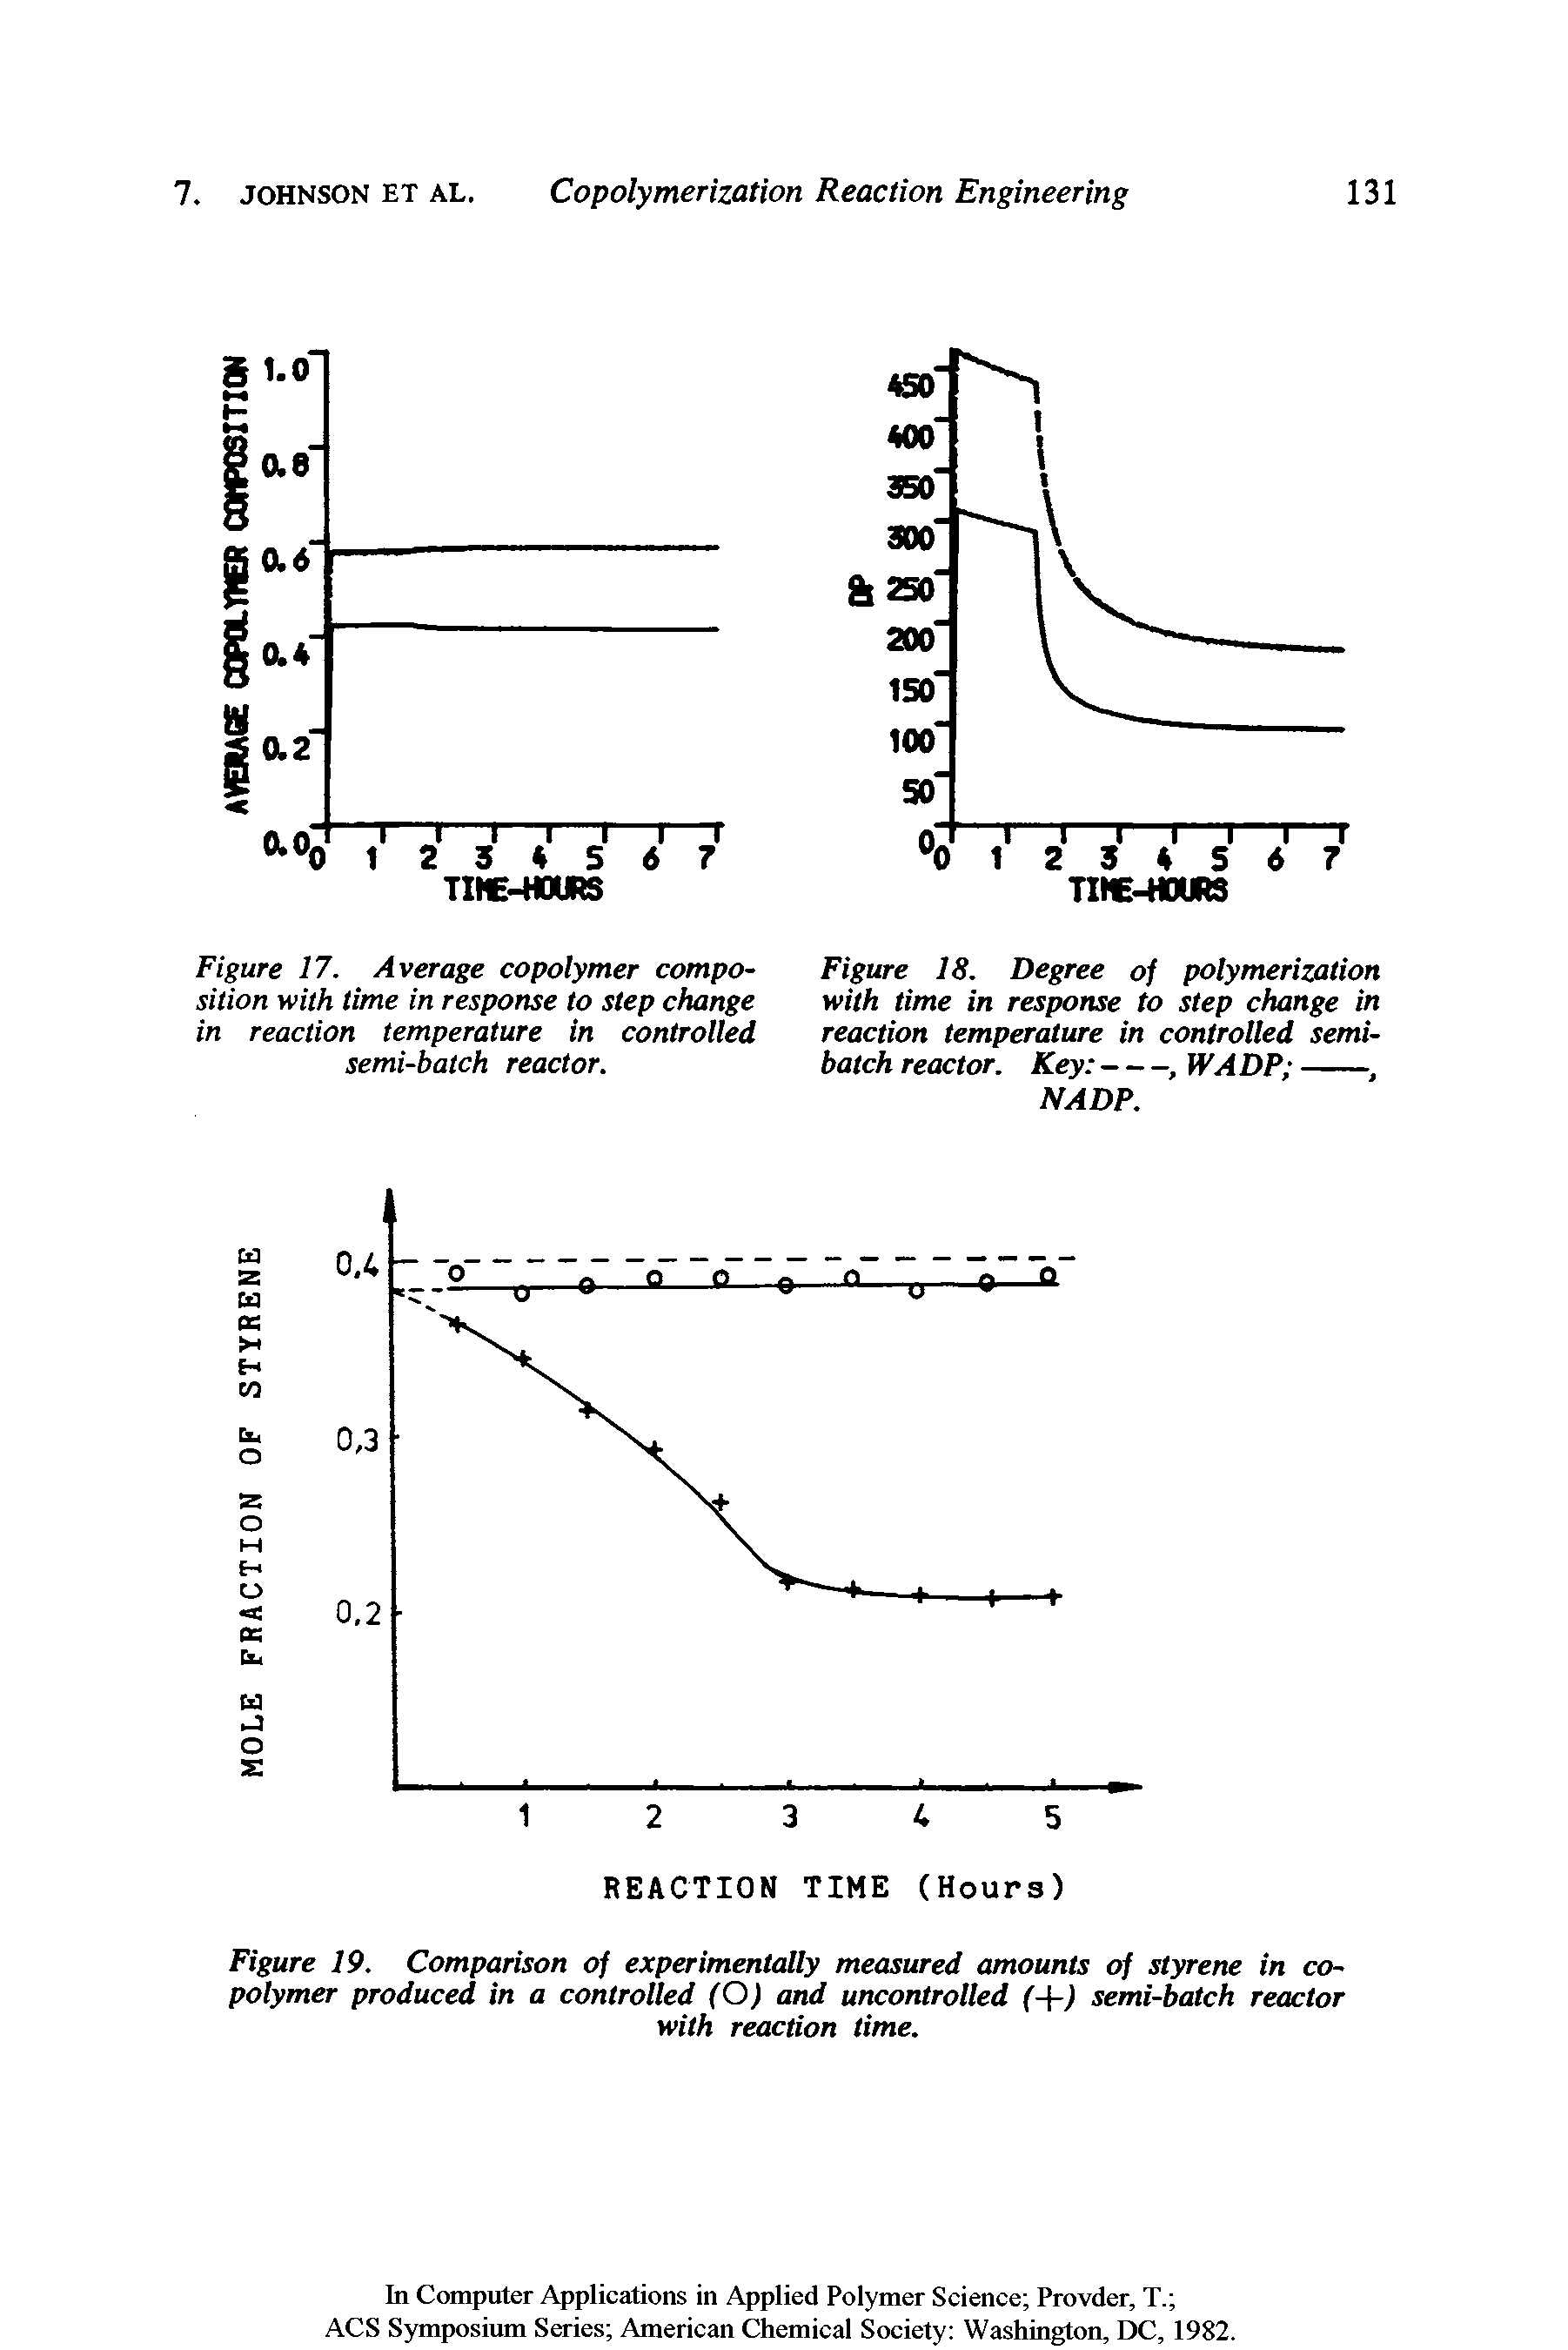 Figure 18. Degree of polymerization with time in response to step change in reaction temperature in controlled semibatch reactor. Key ------, WADP -------,...